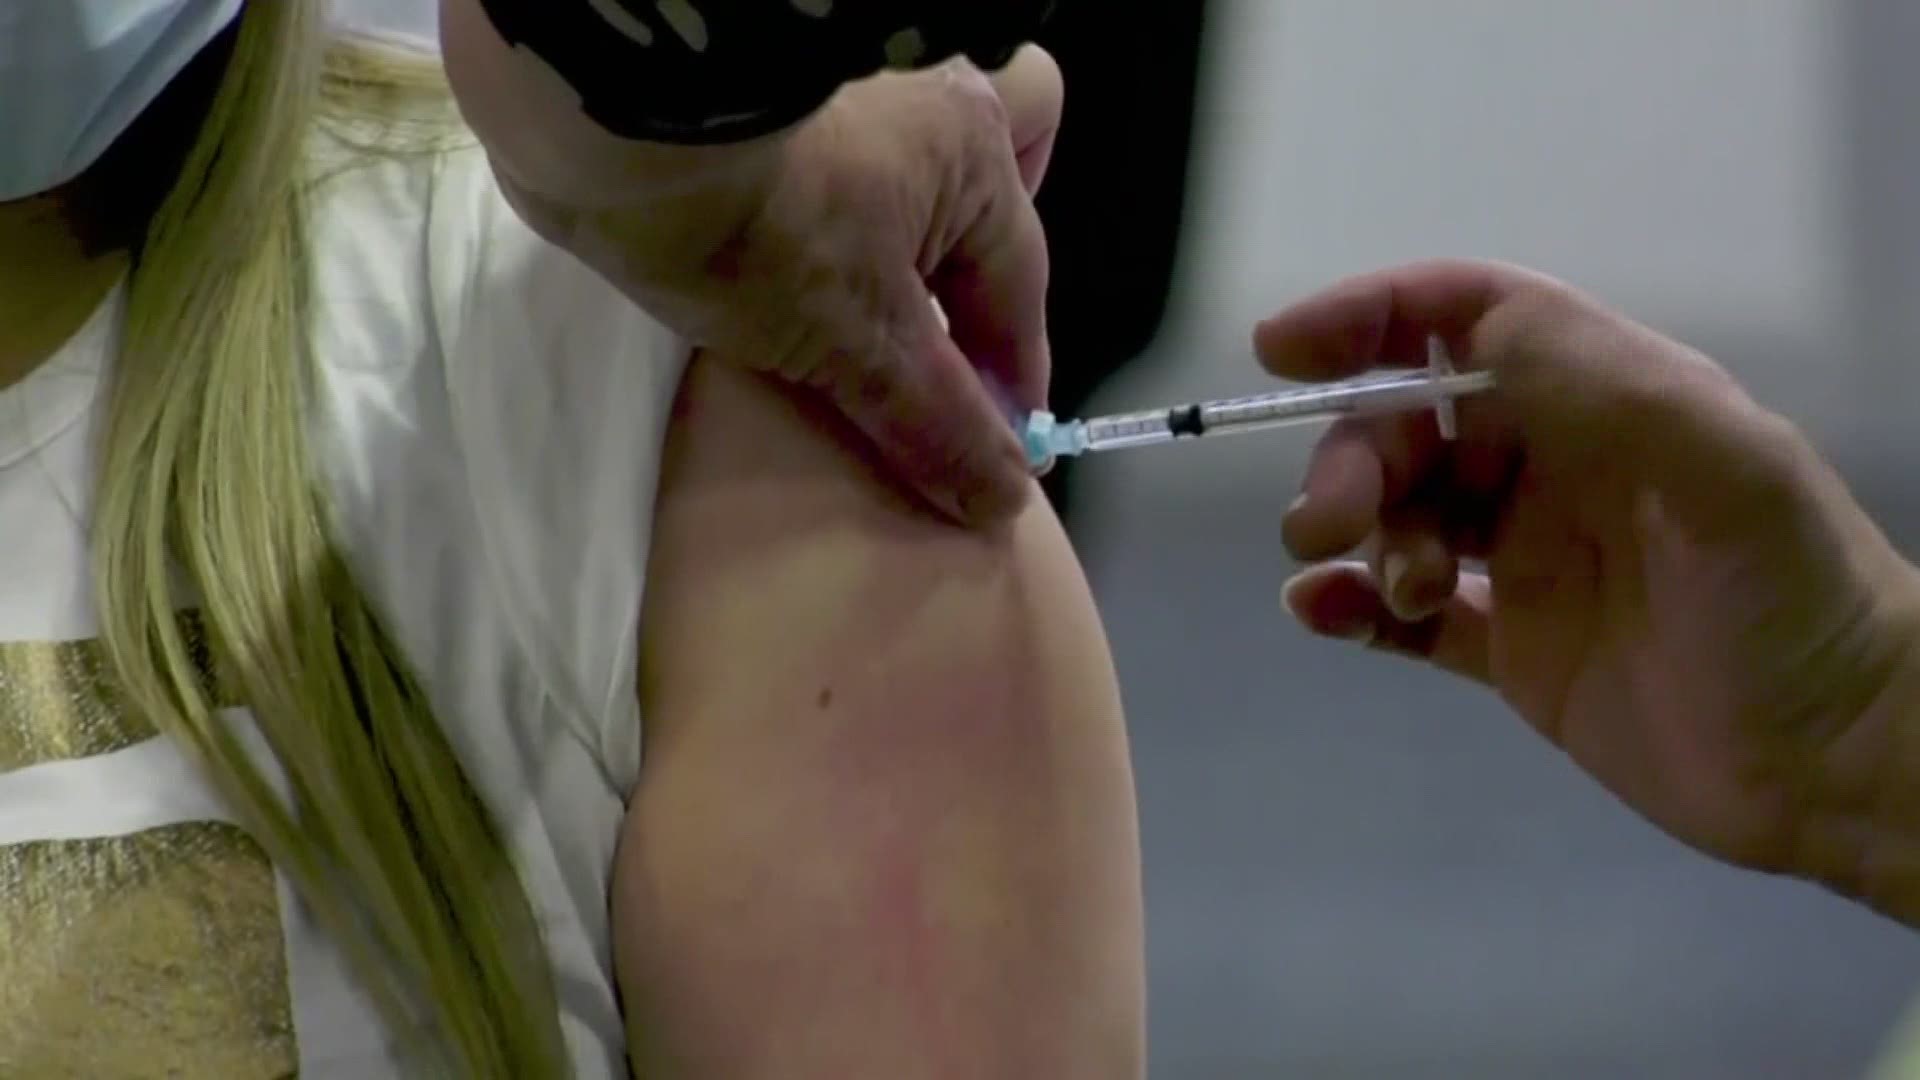 Medical experts say state should aim for 90% vaccinated.